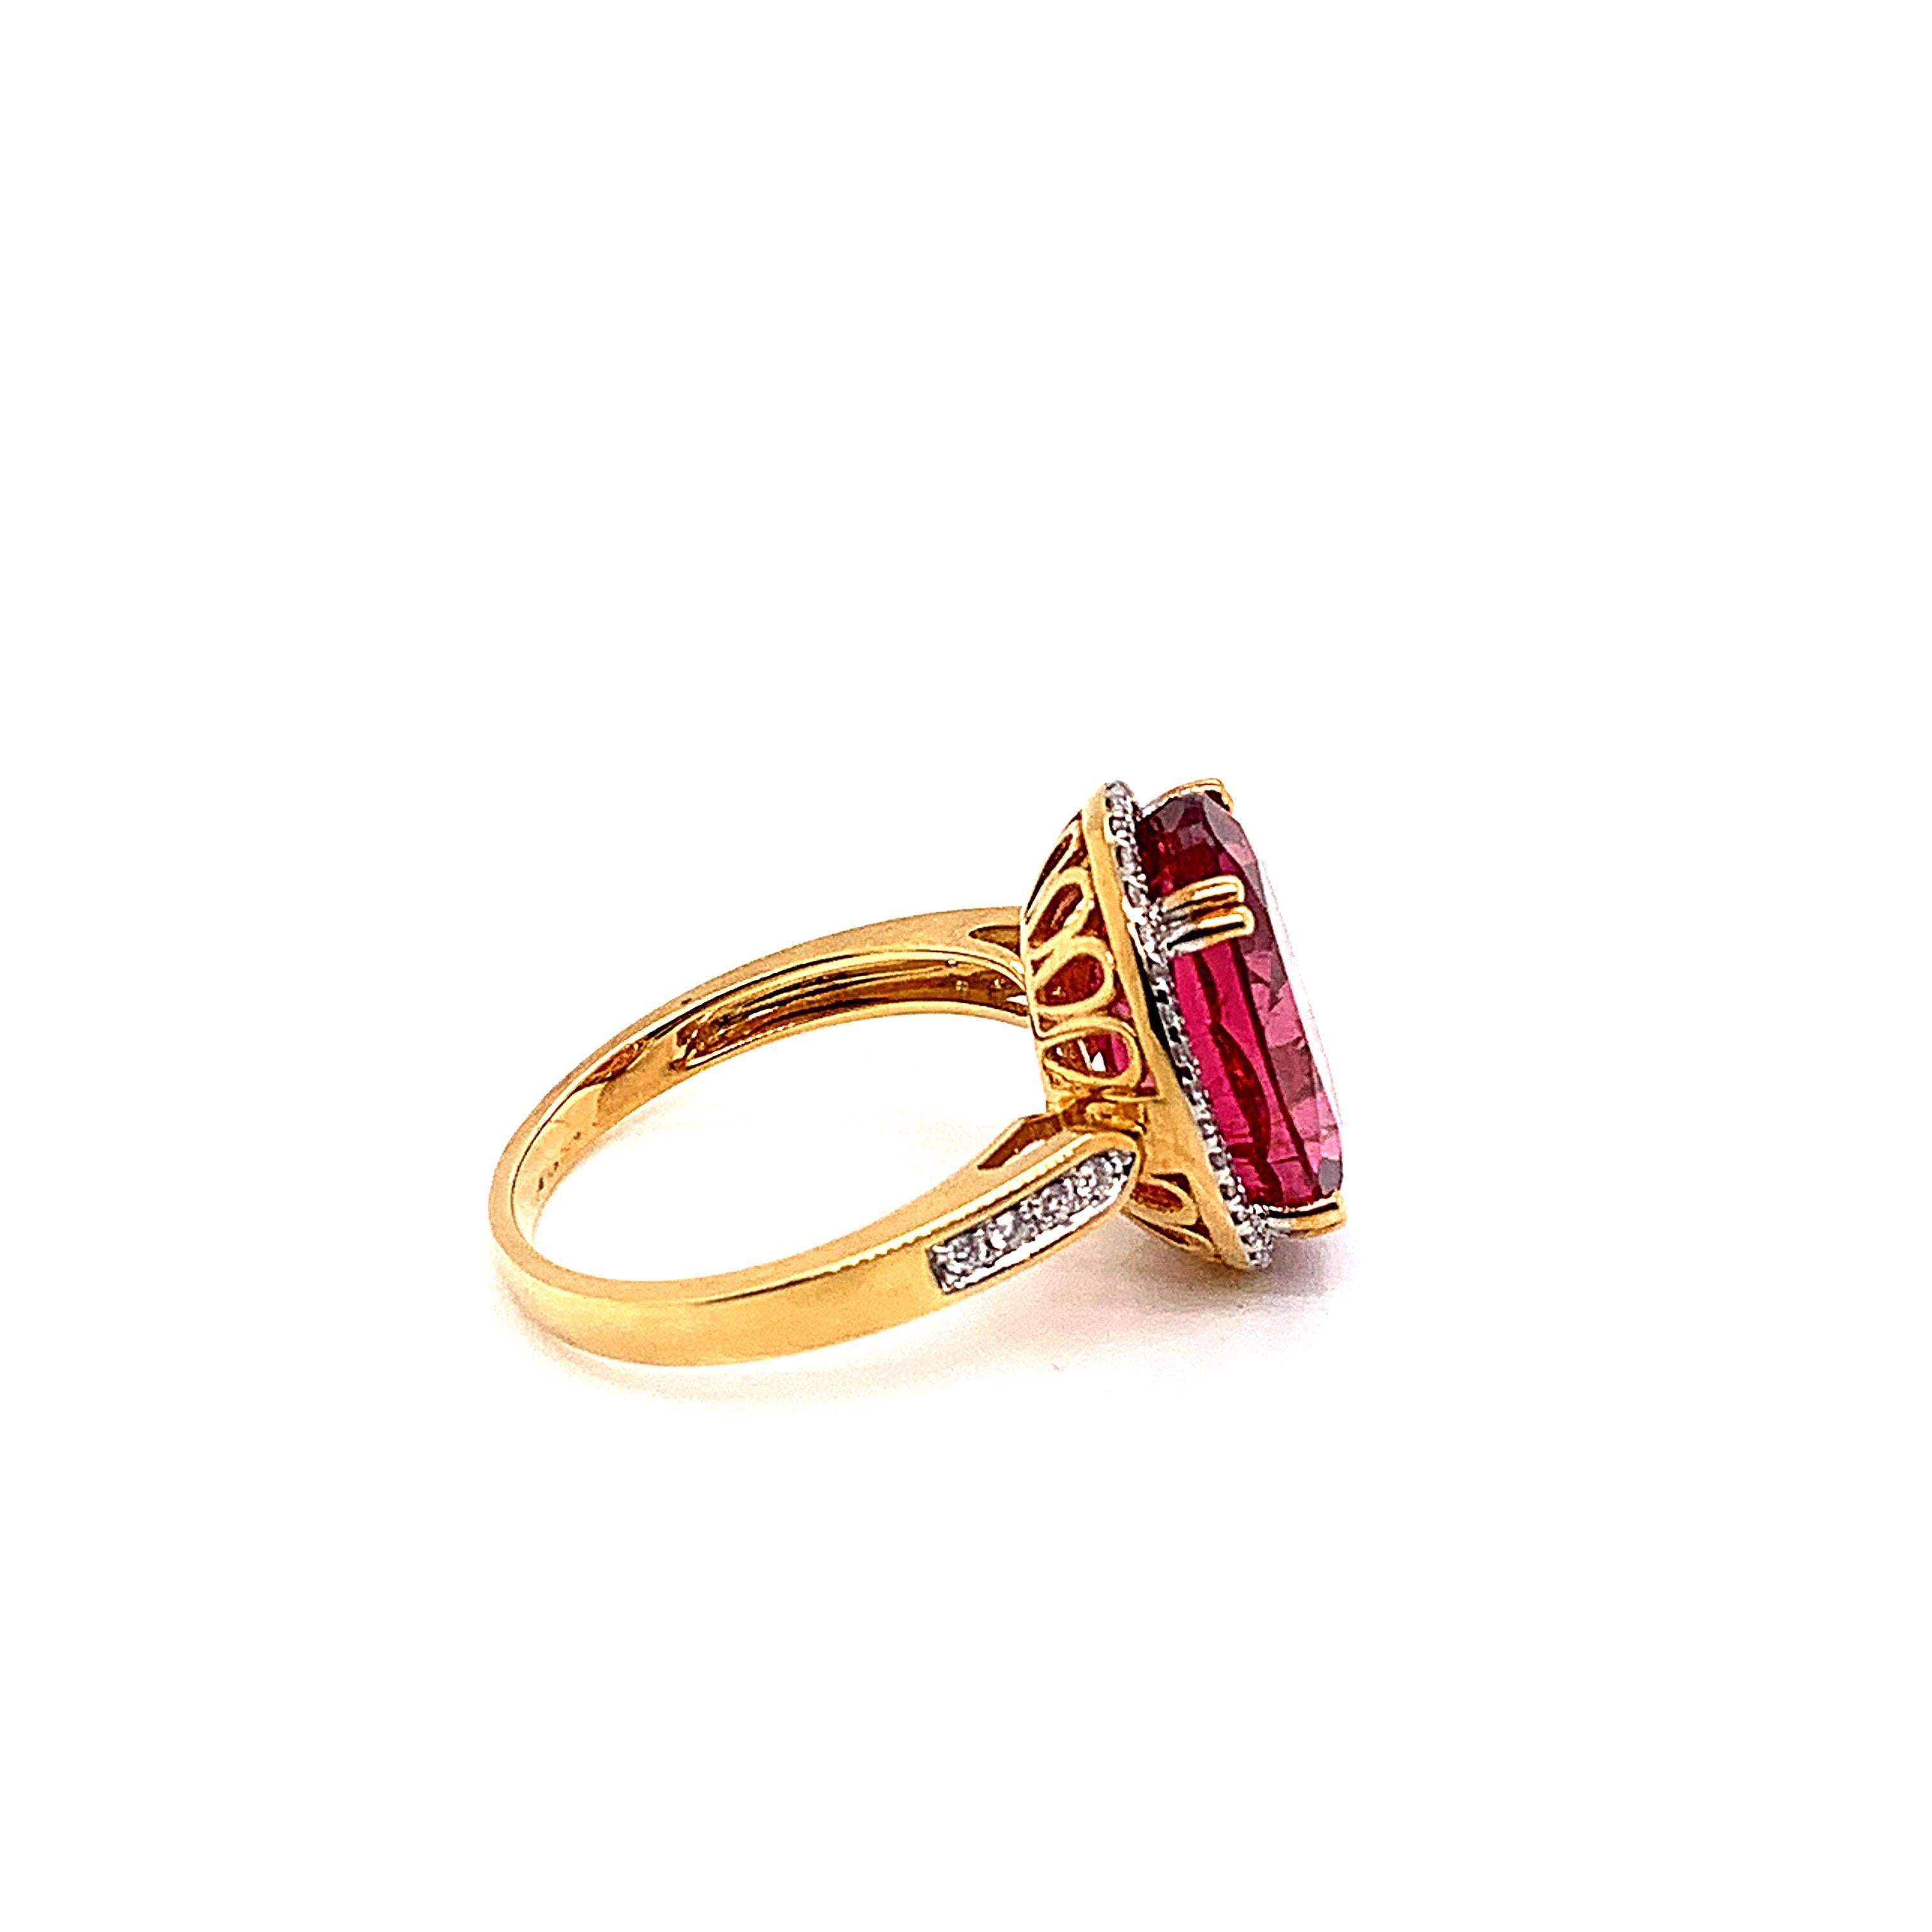 Contemporary 7.13 Carat Oval Shaped Rubelite Ring in 18 Karat Yellow Gold with Diamonds For Sale